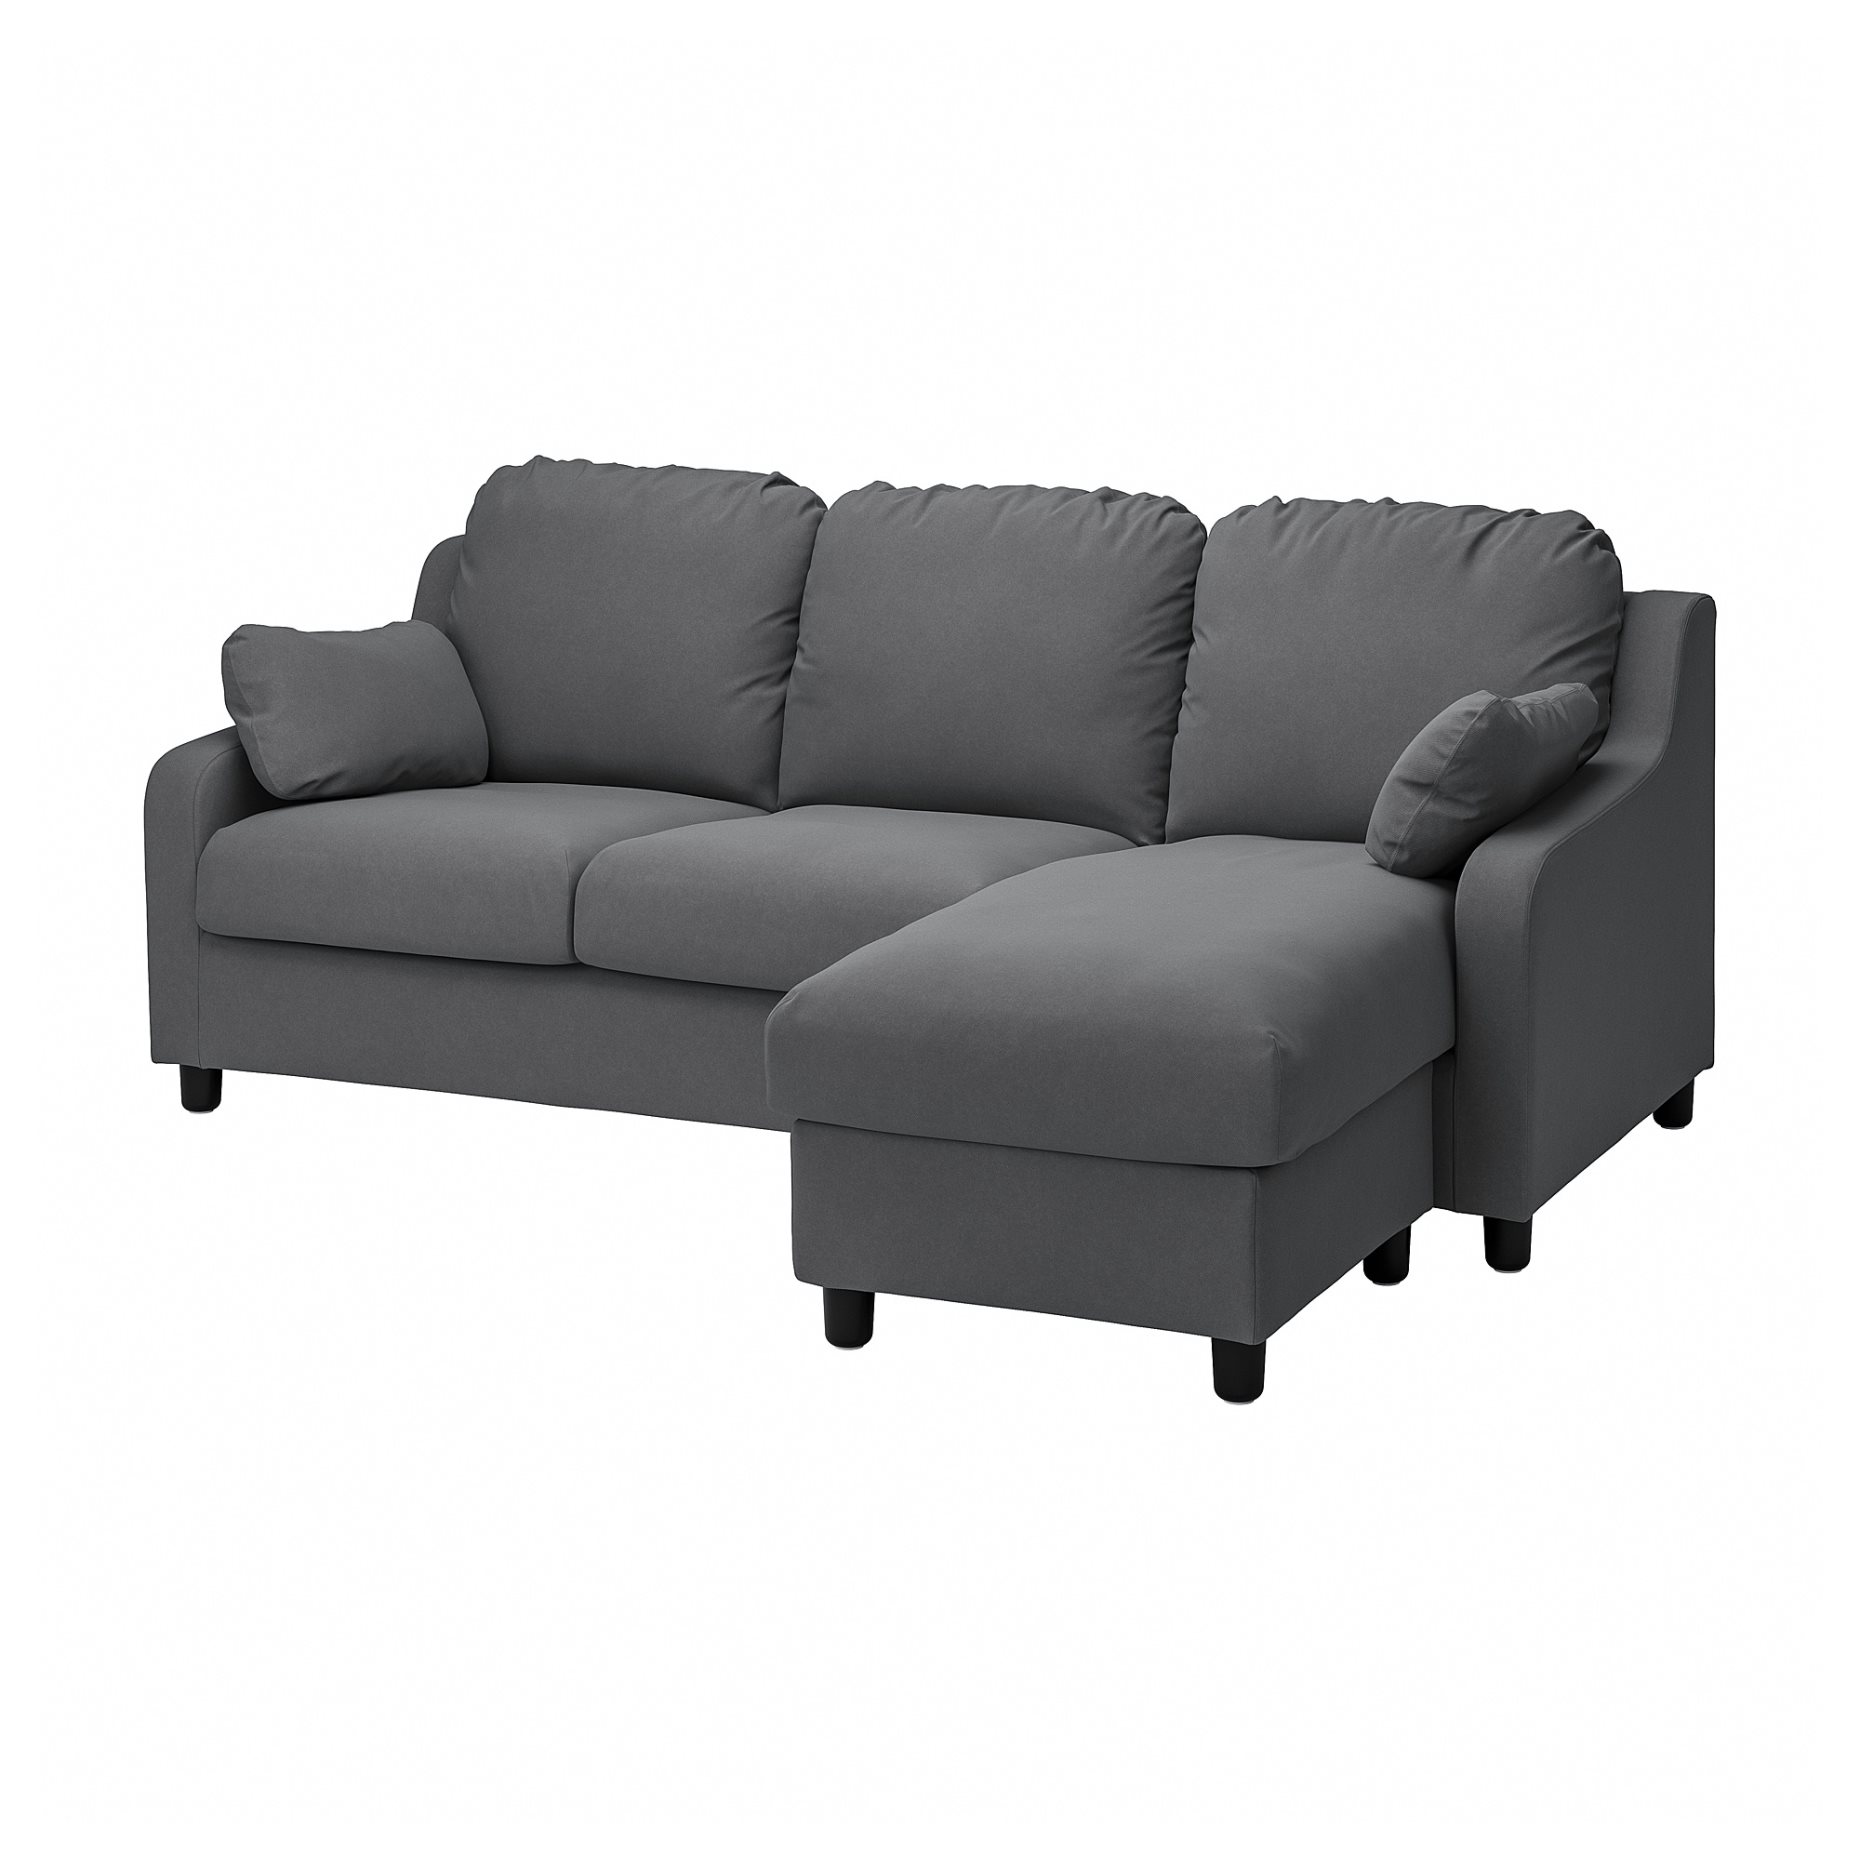 VINLIDEN, cover for 3-seat sofa with chaise longue, 304.383.68